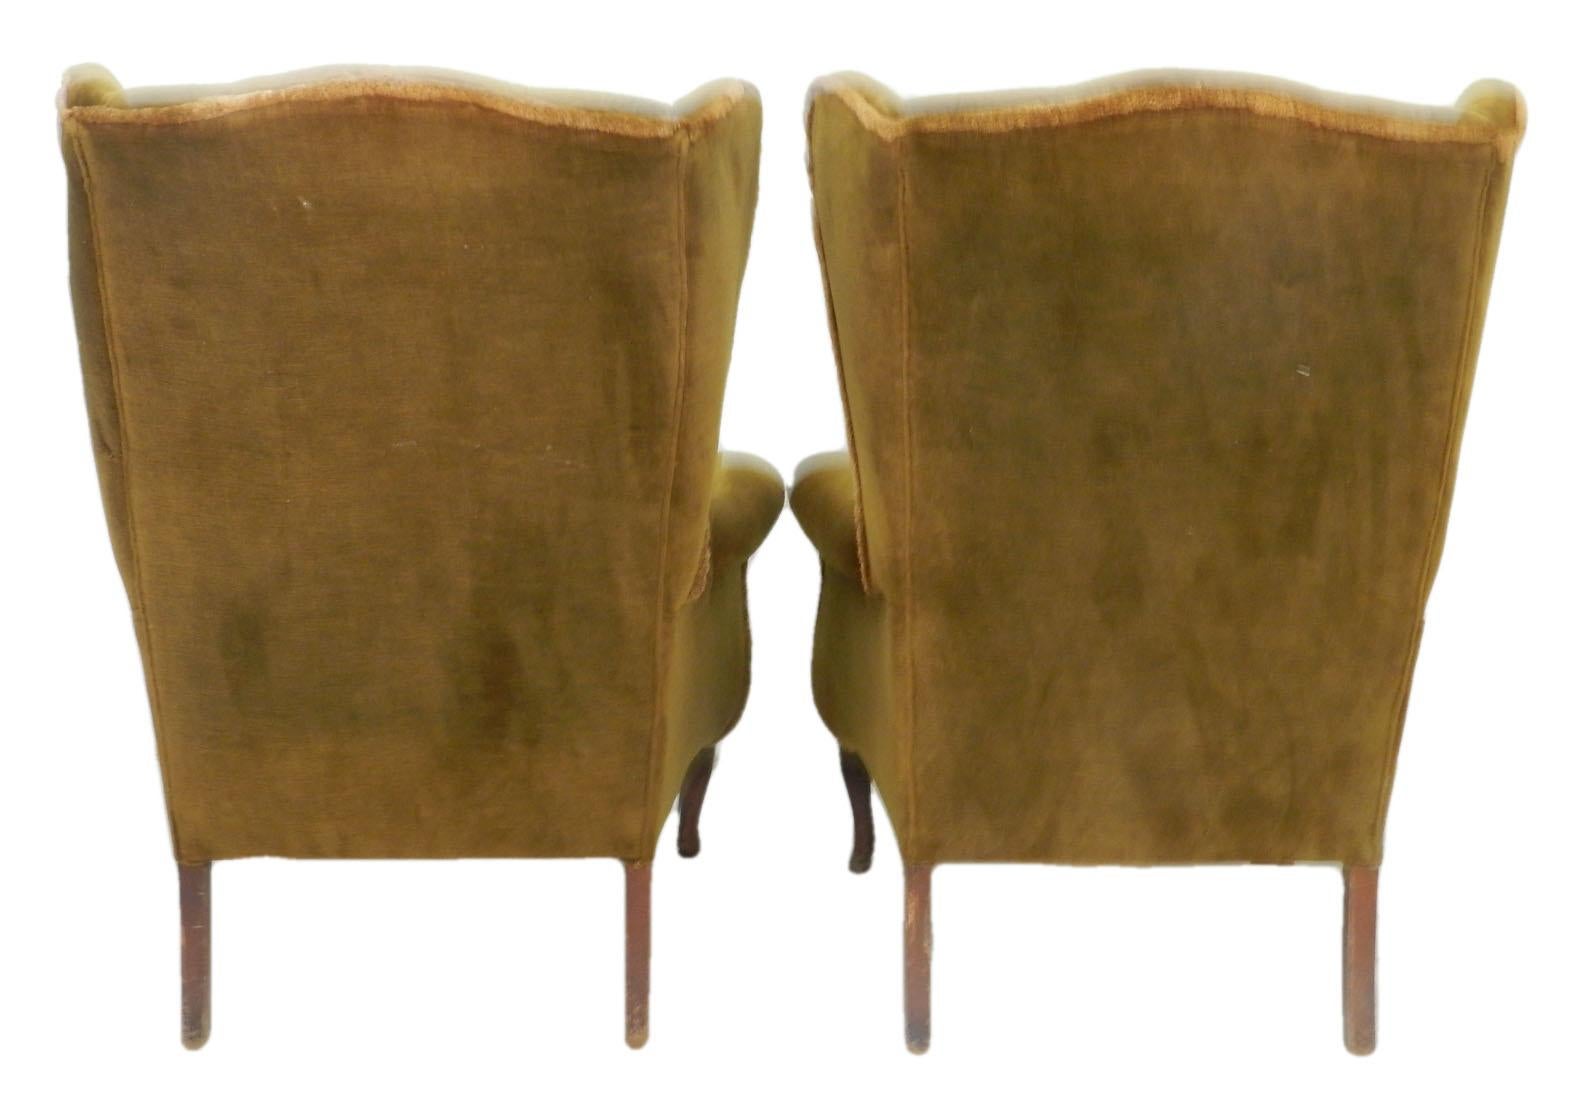 British Pair of Wingback Armchairs Early 20th Century Includes Recovering Tufted Button